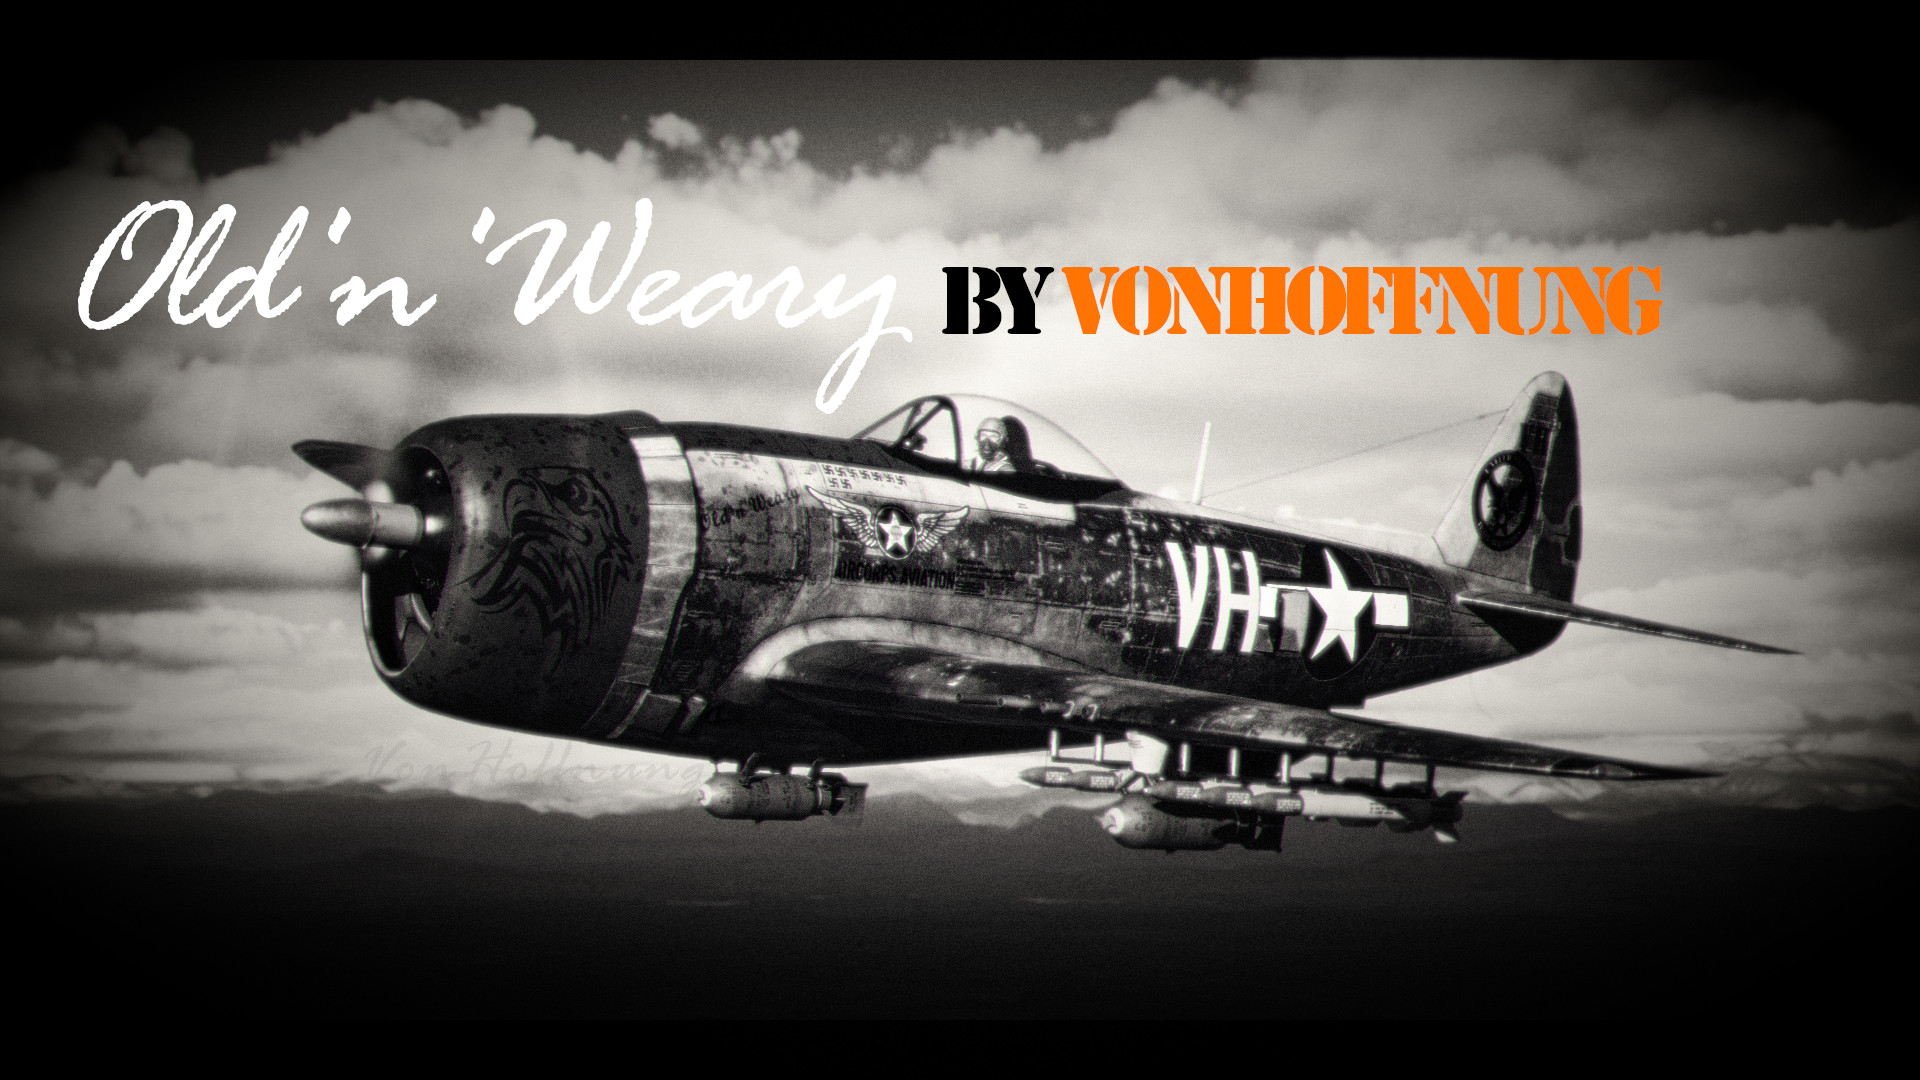 Old'n'Weary P-47 (Fictional)